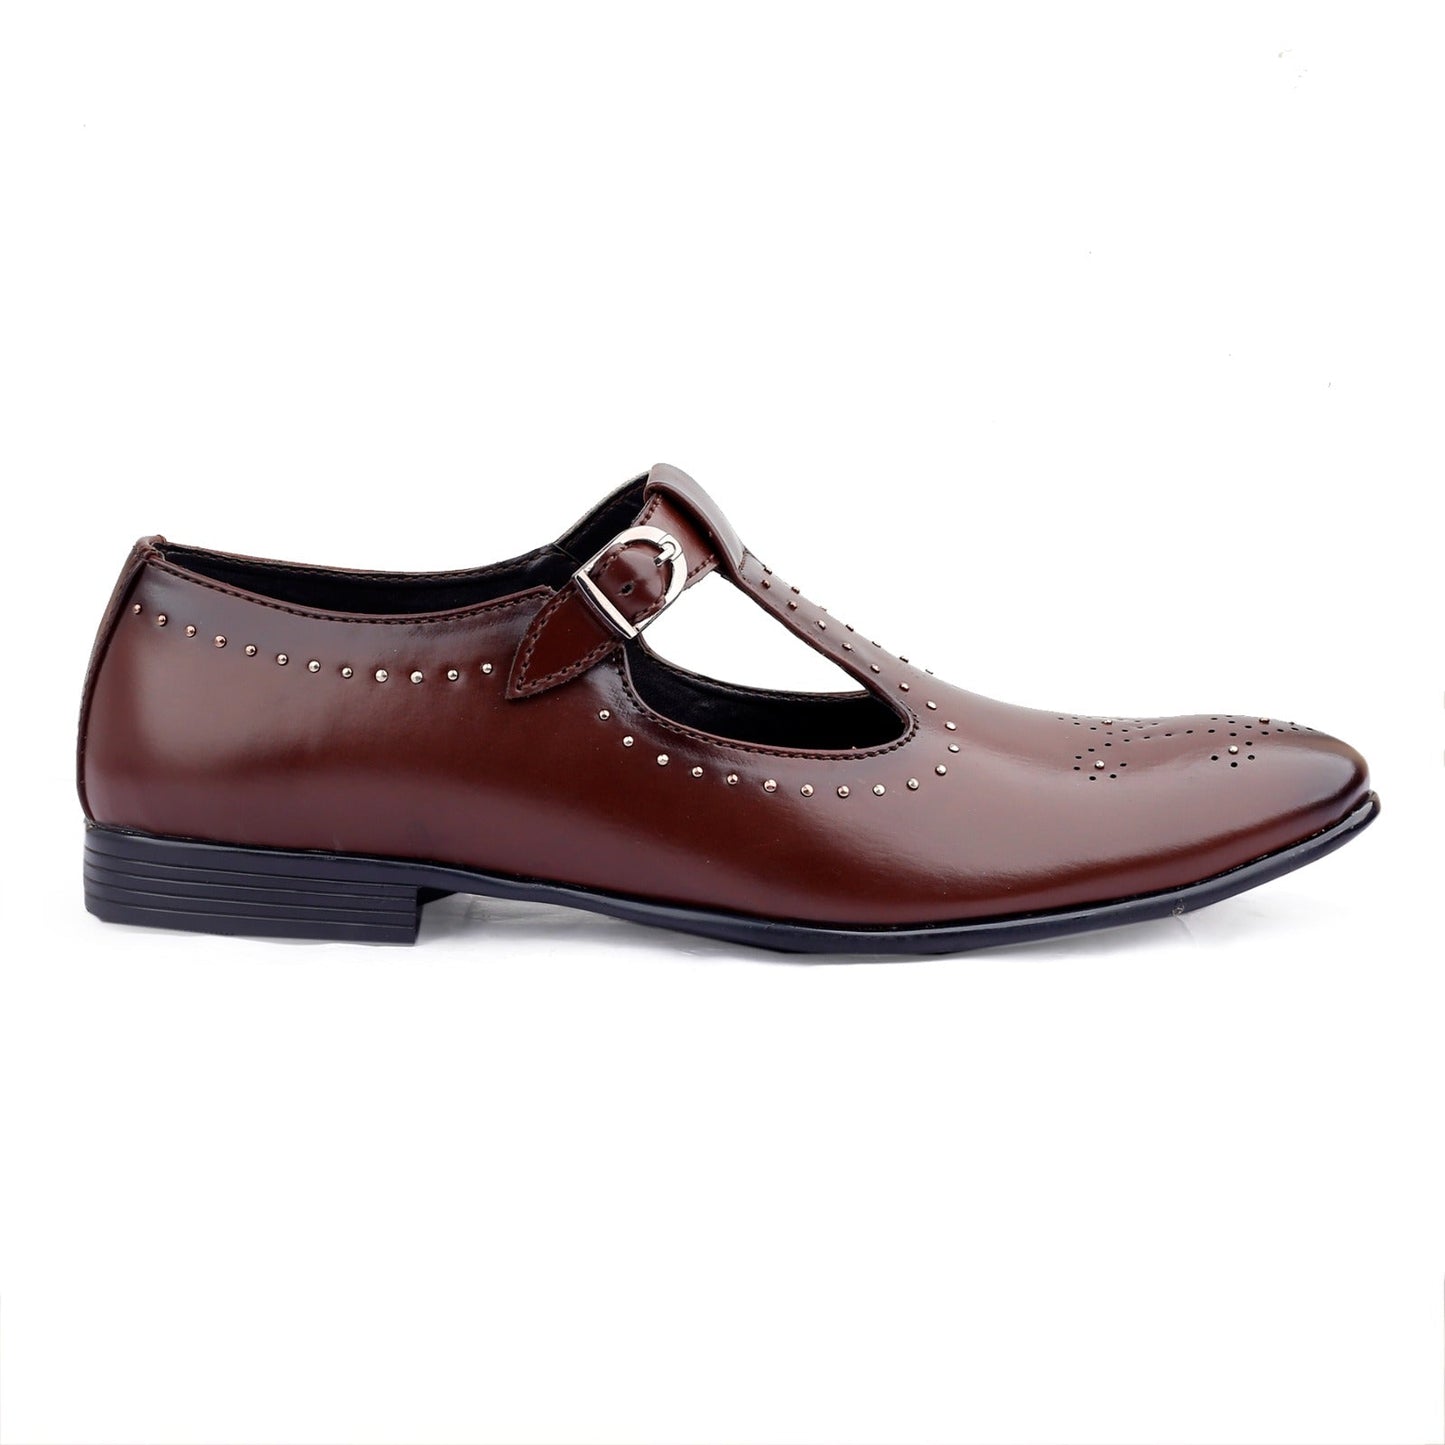 Buy Now Stylish Peshawari Shoes For Partywear And Casualwear - JackMarc - JACKMARC.COM